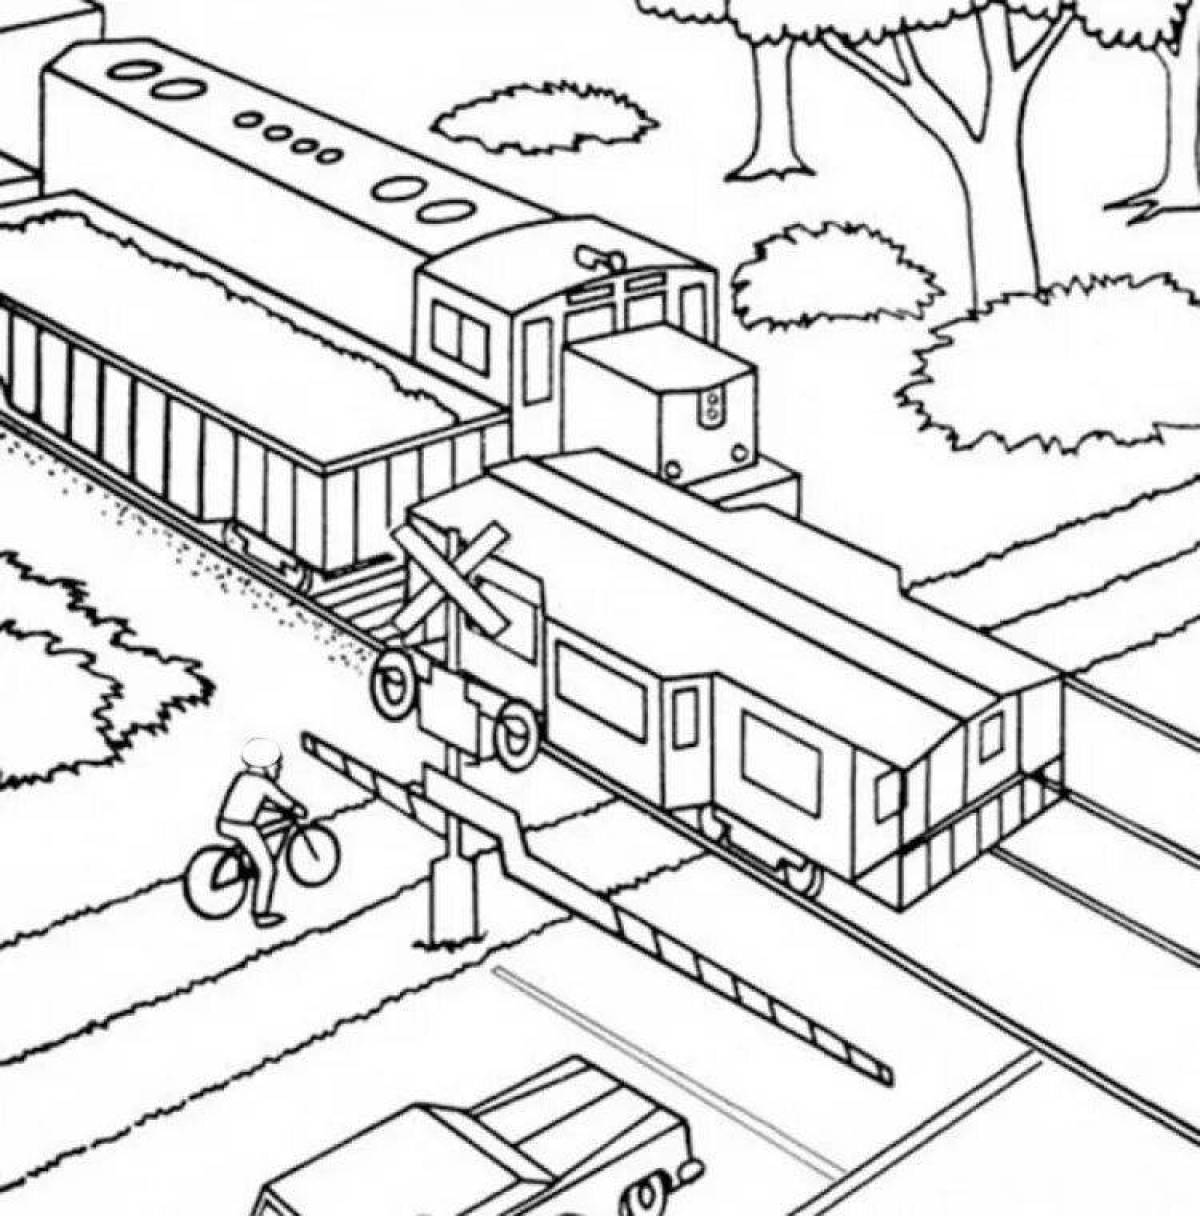 Glorious railroad crossing coloring page